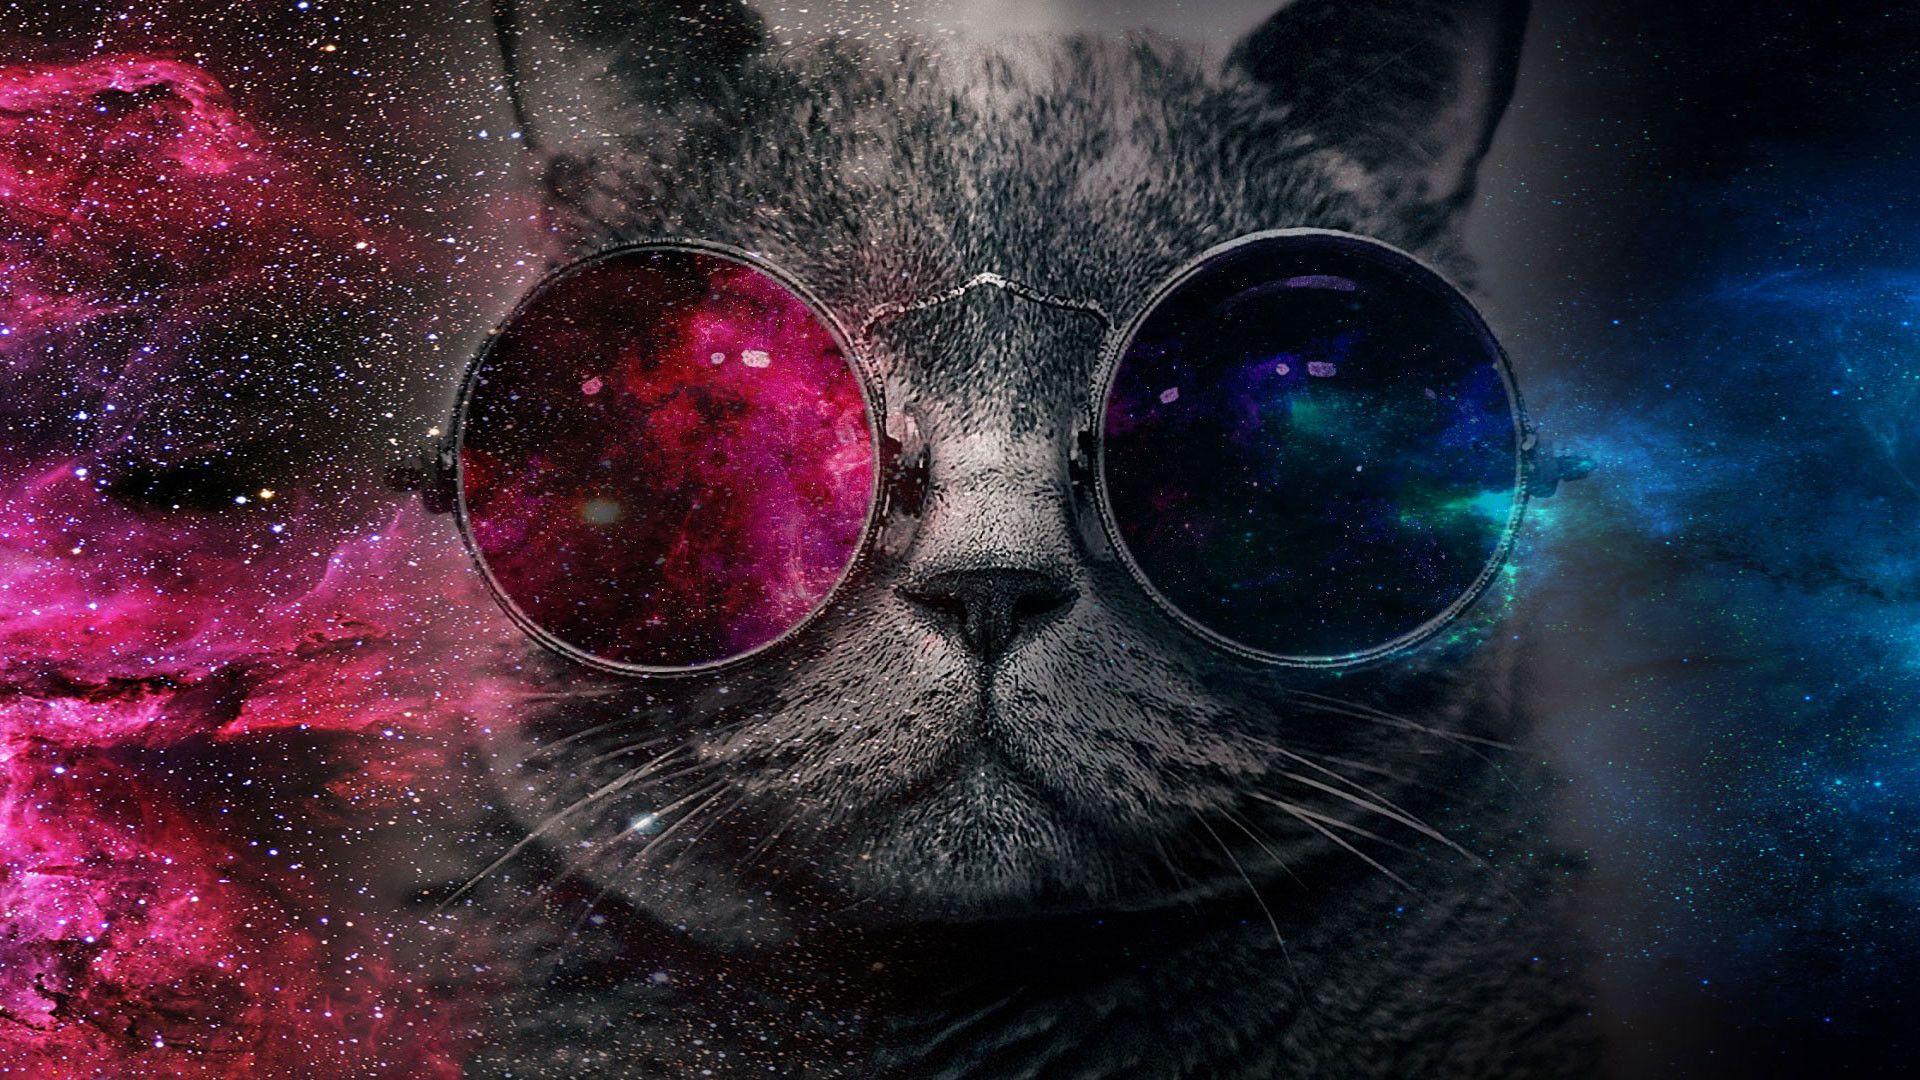 Cool Galaxy Cat Wallpapers - Top Free